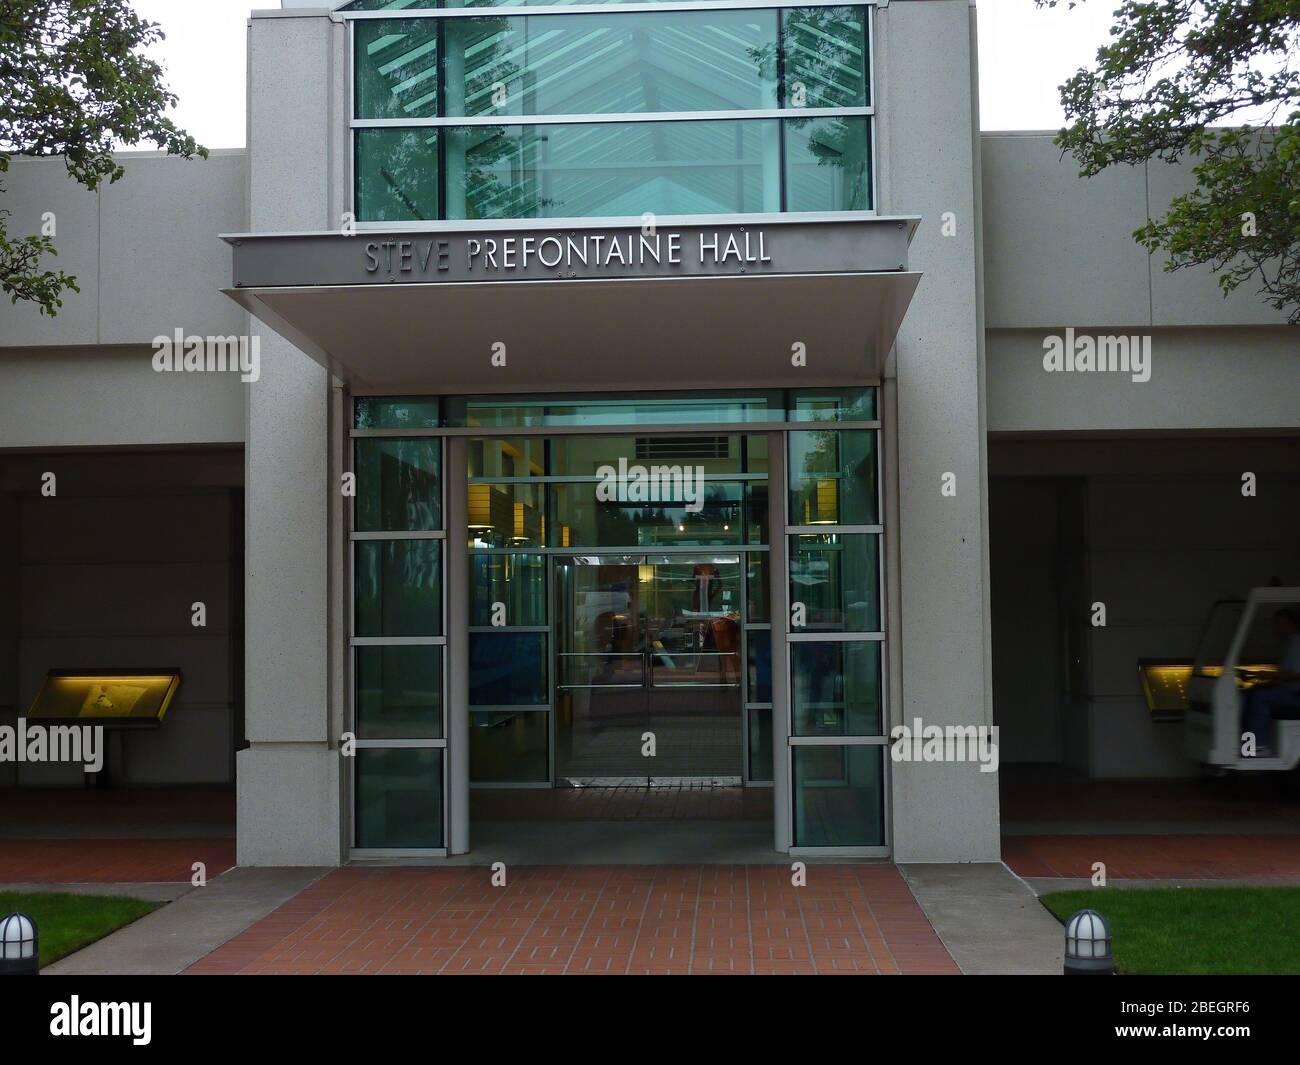 Oregon, AUG 7, 2009 - Exterior view of Steve Prefontaine Hall in the Nike World Headquarters Stock Photo - Alamy